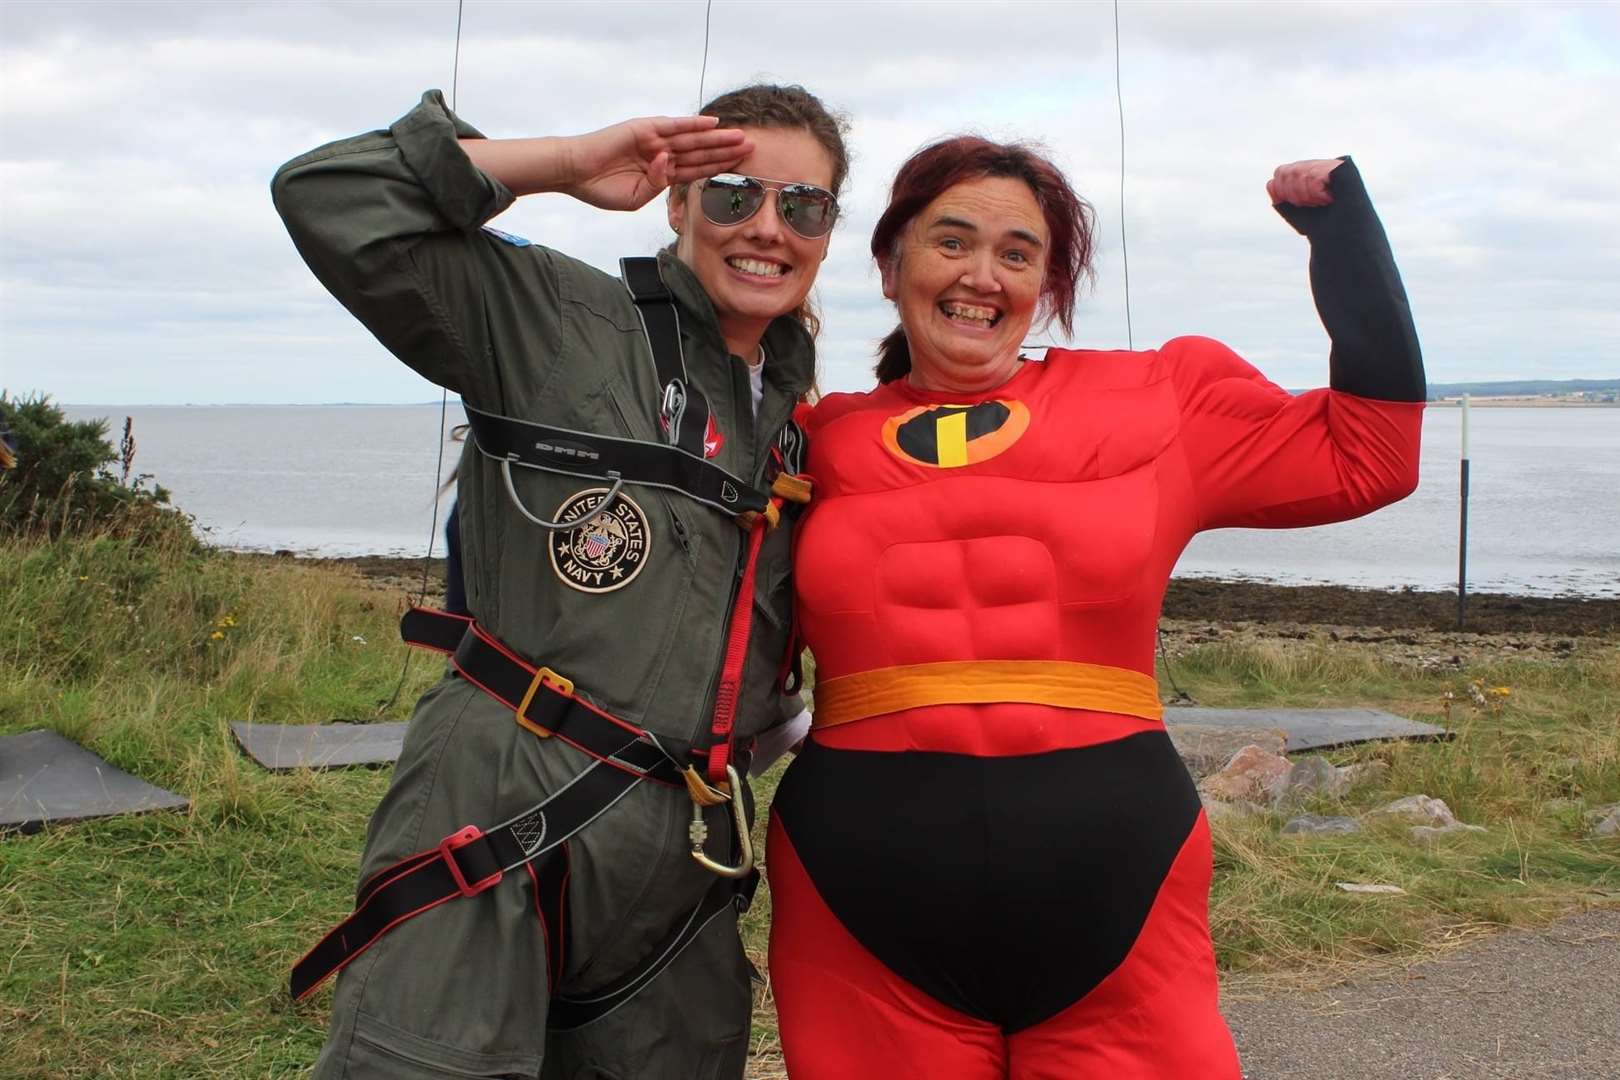 Susan Andrew (left) and Jacky Potts after their successful abseil from the Kessock Bridge